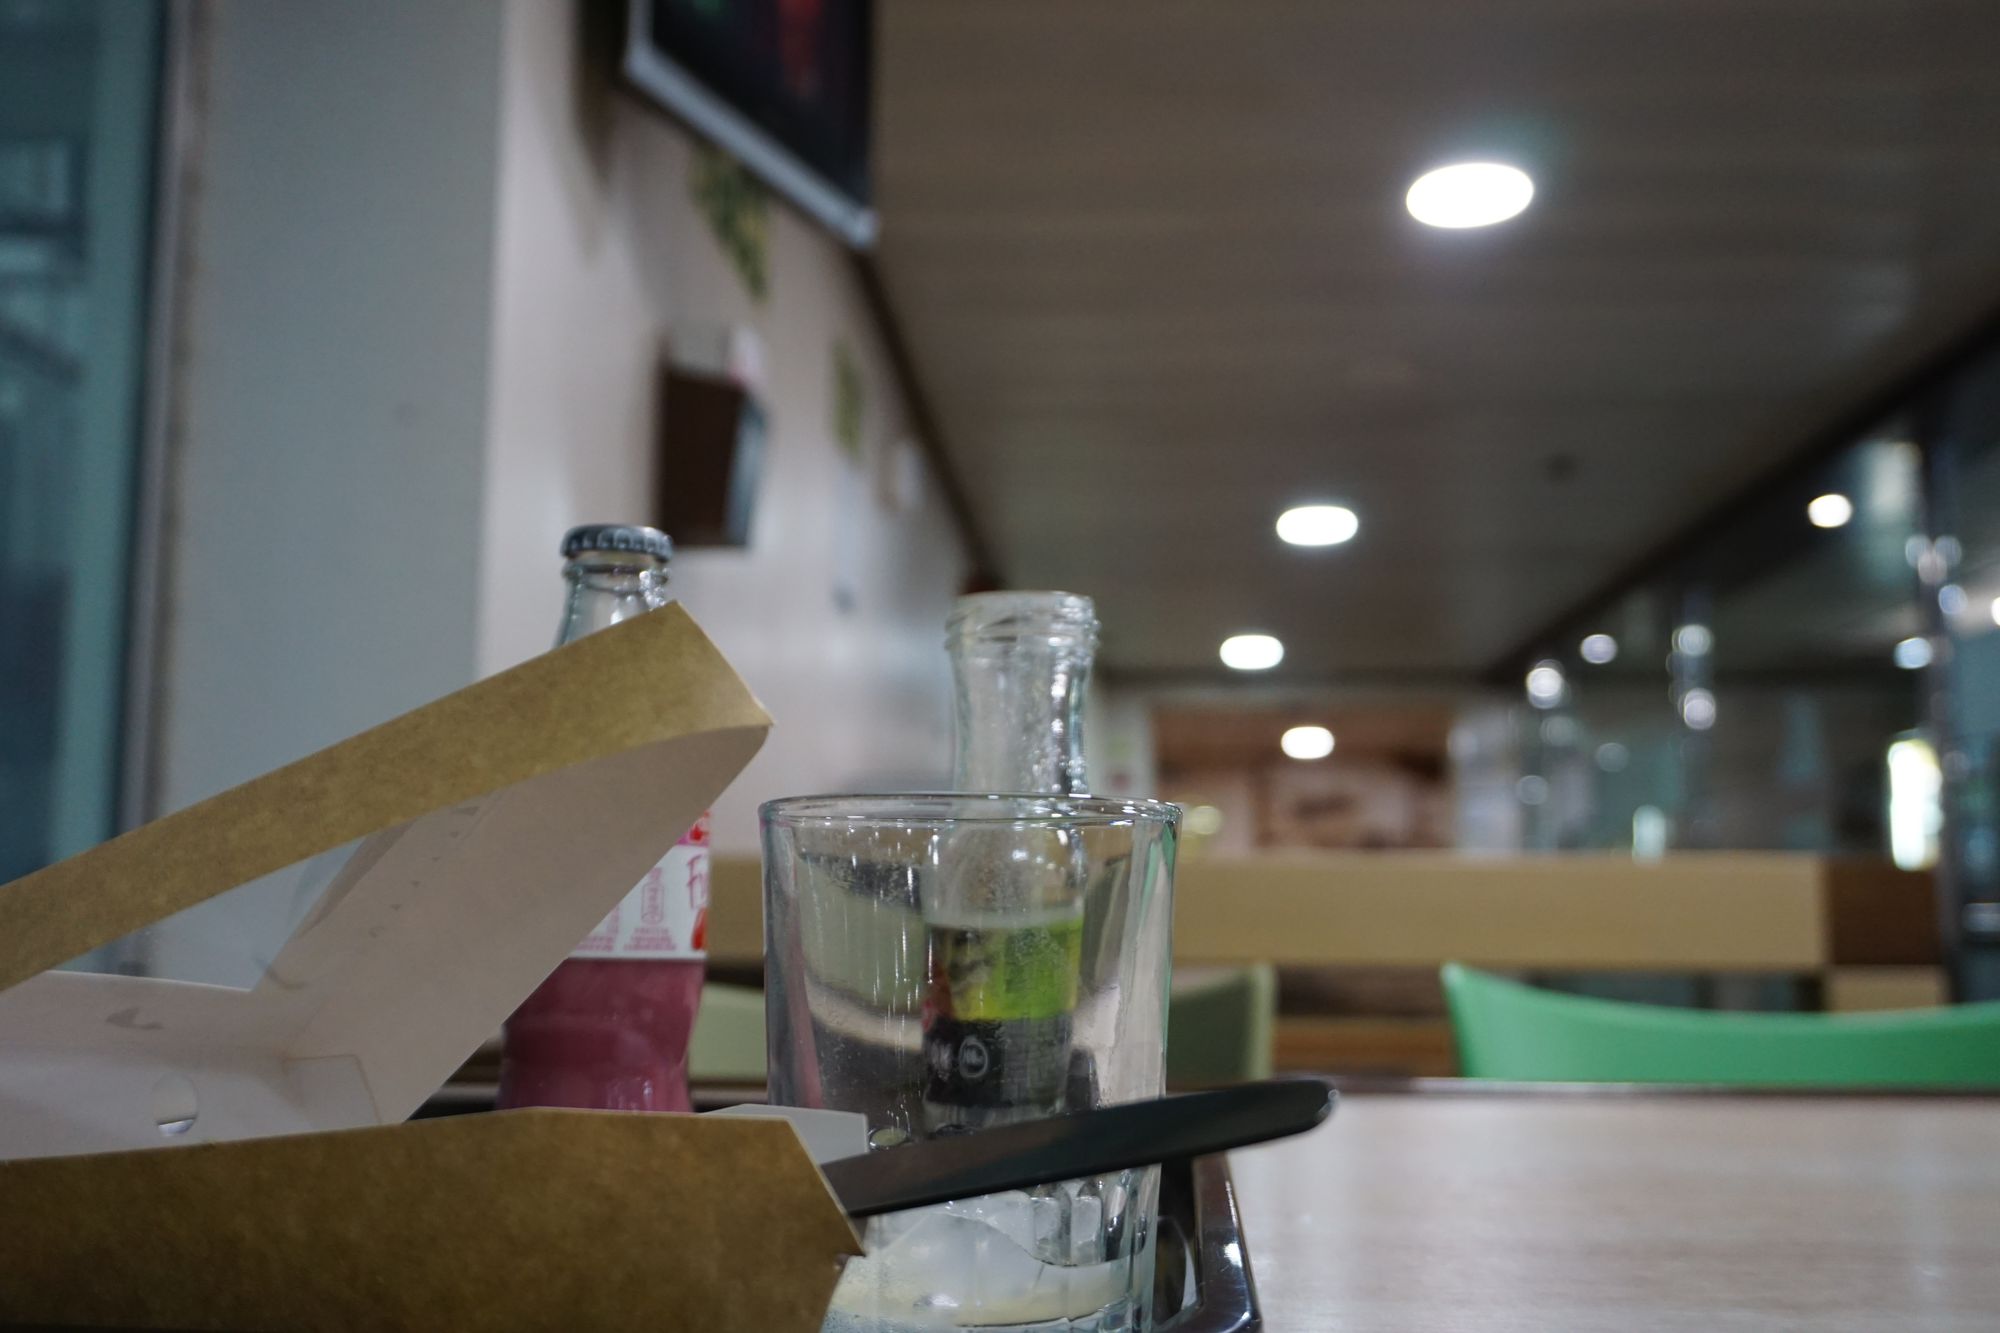 Glasses, bottles, and plastic food packaging on a table in a café like setting.